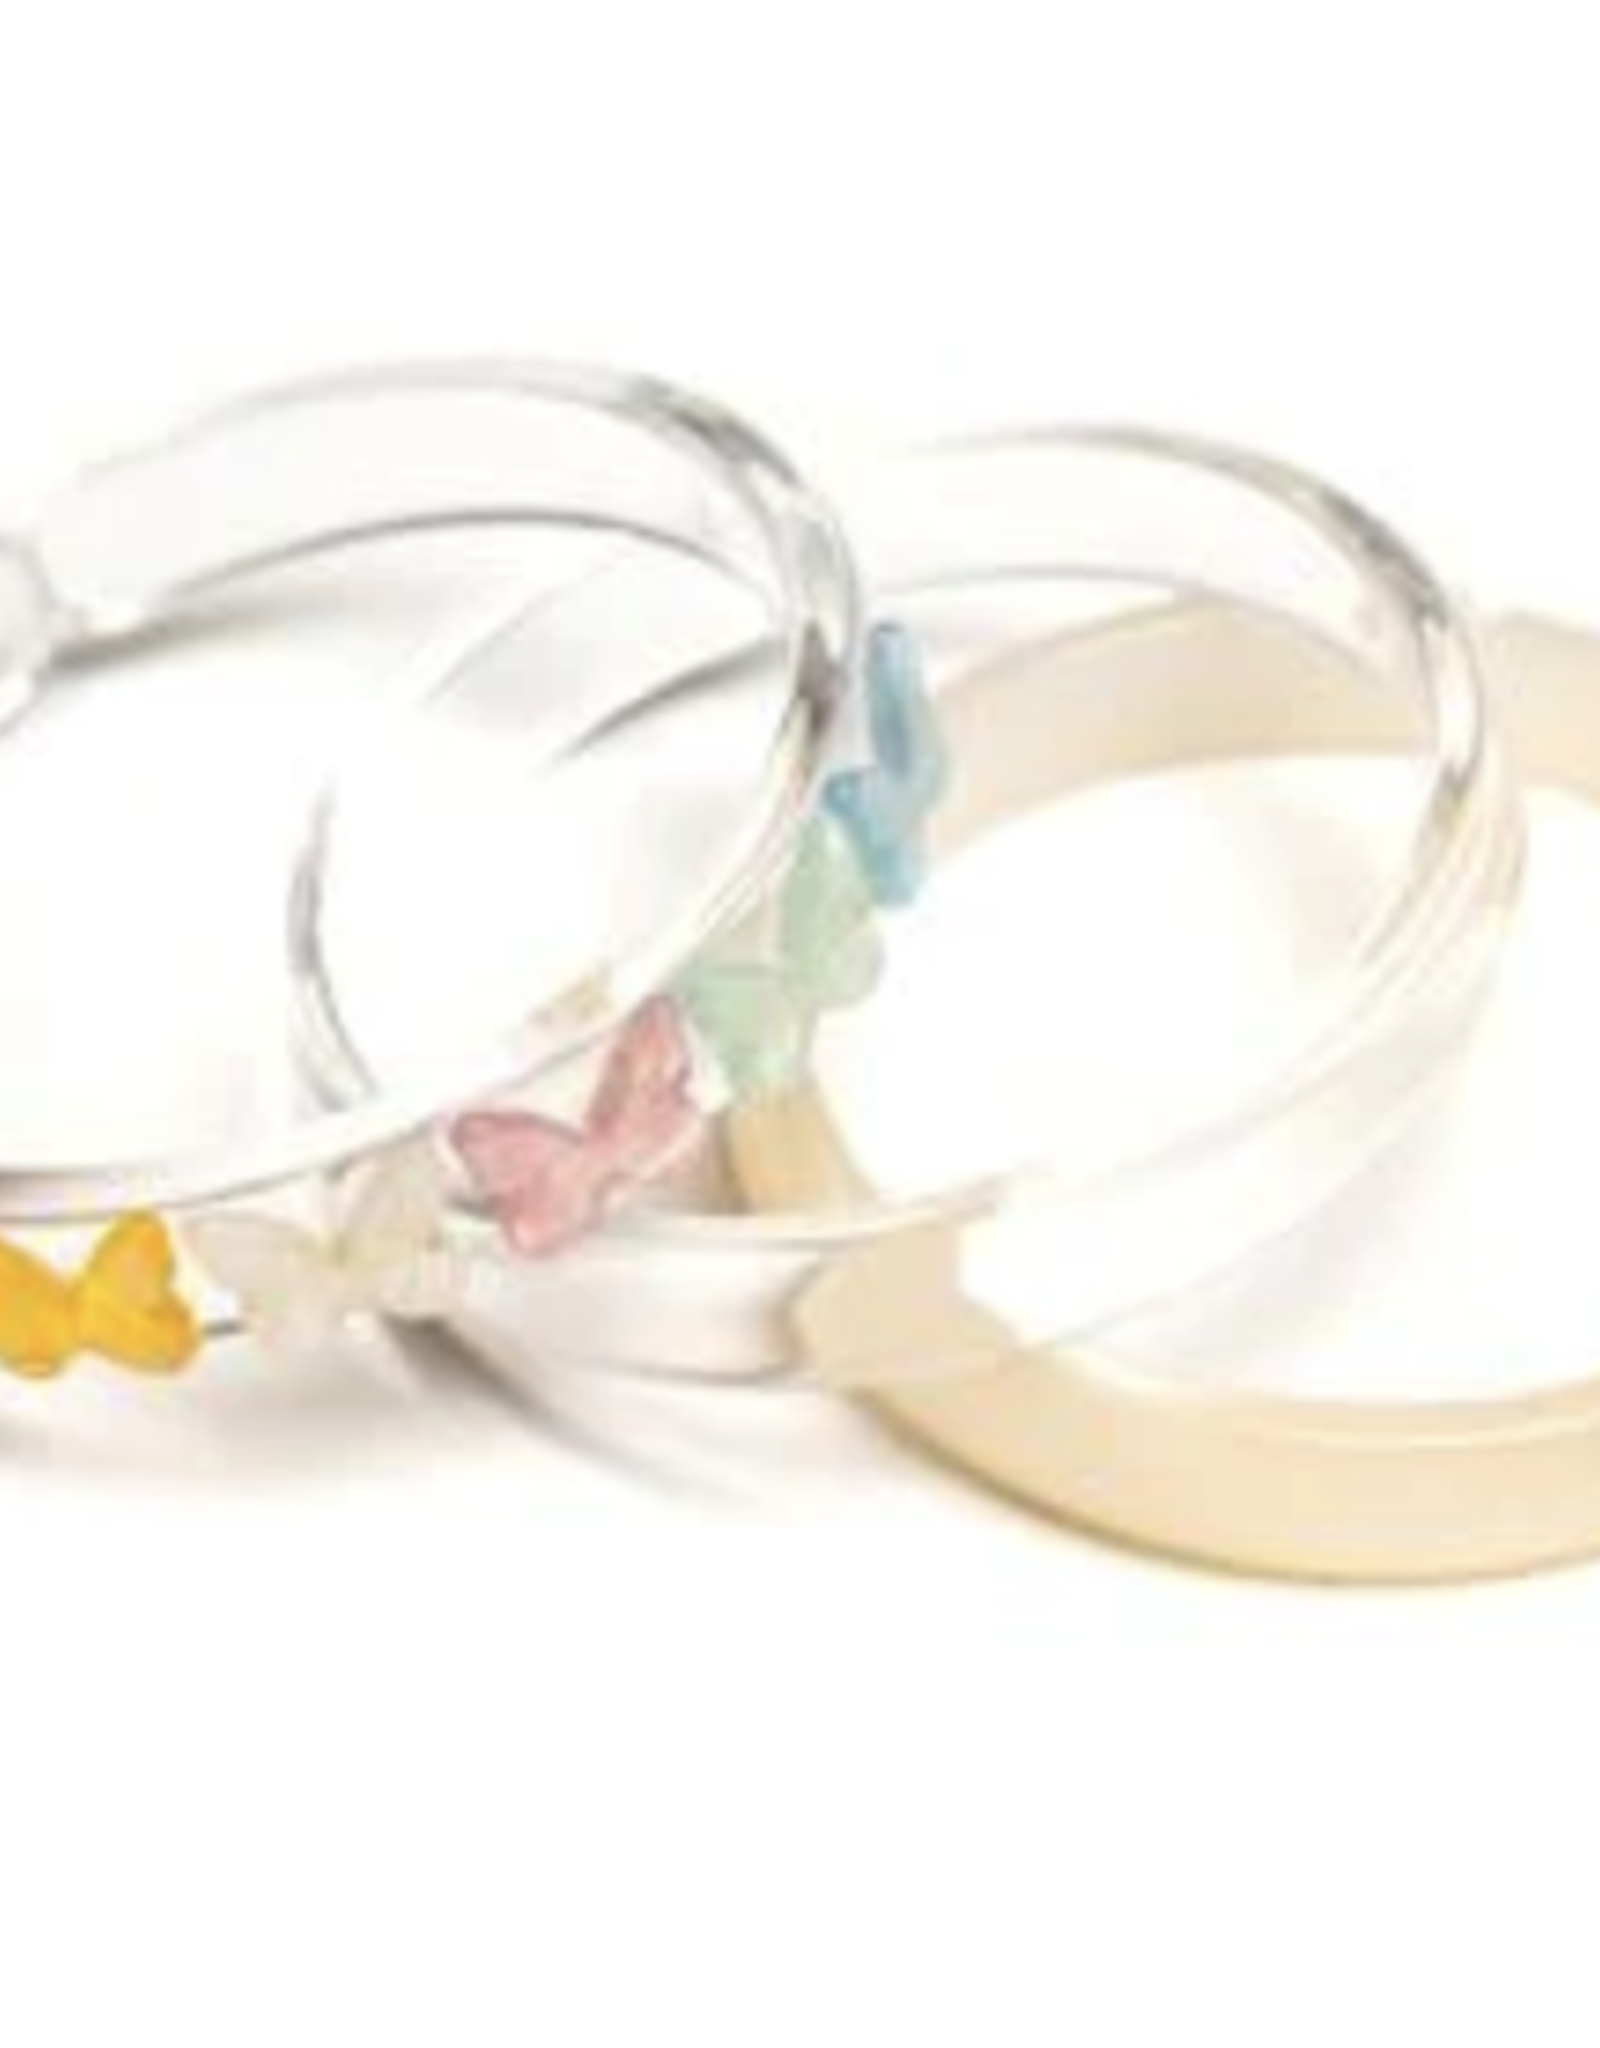 Lilies & Roses pearl butterfly bangles set